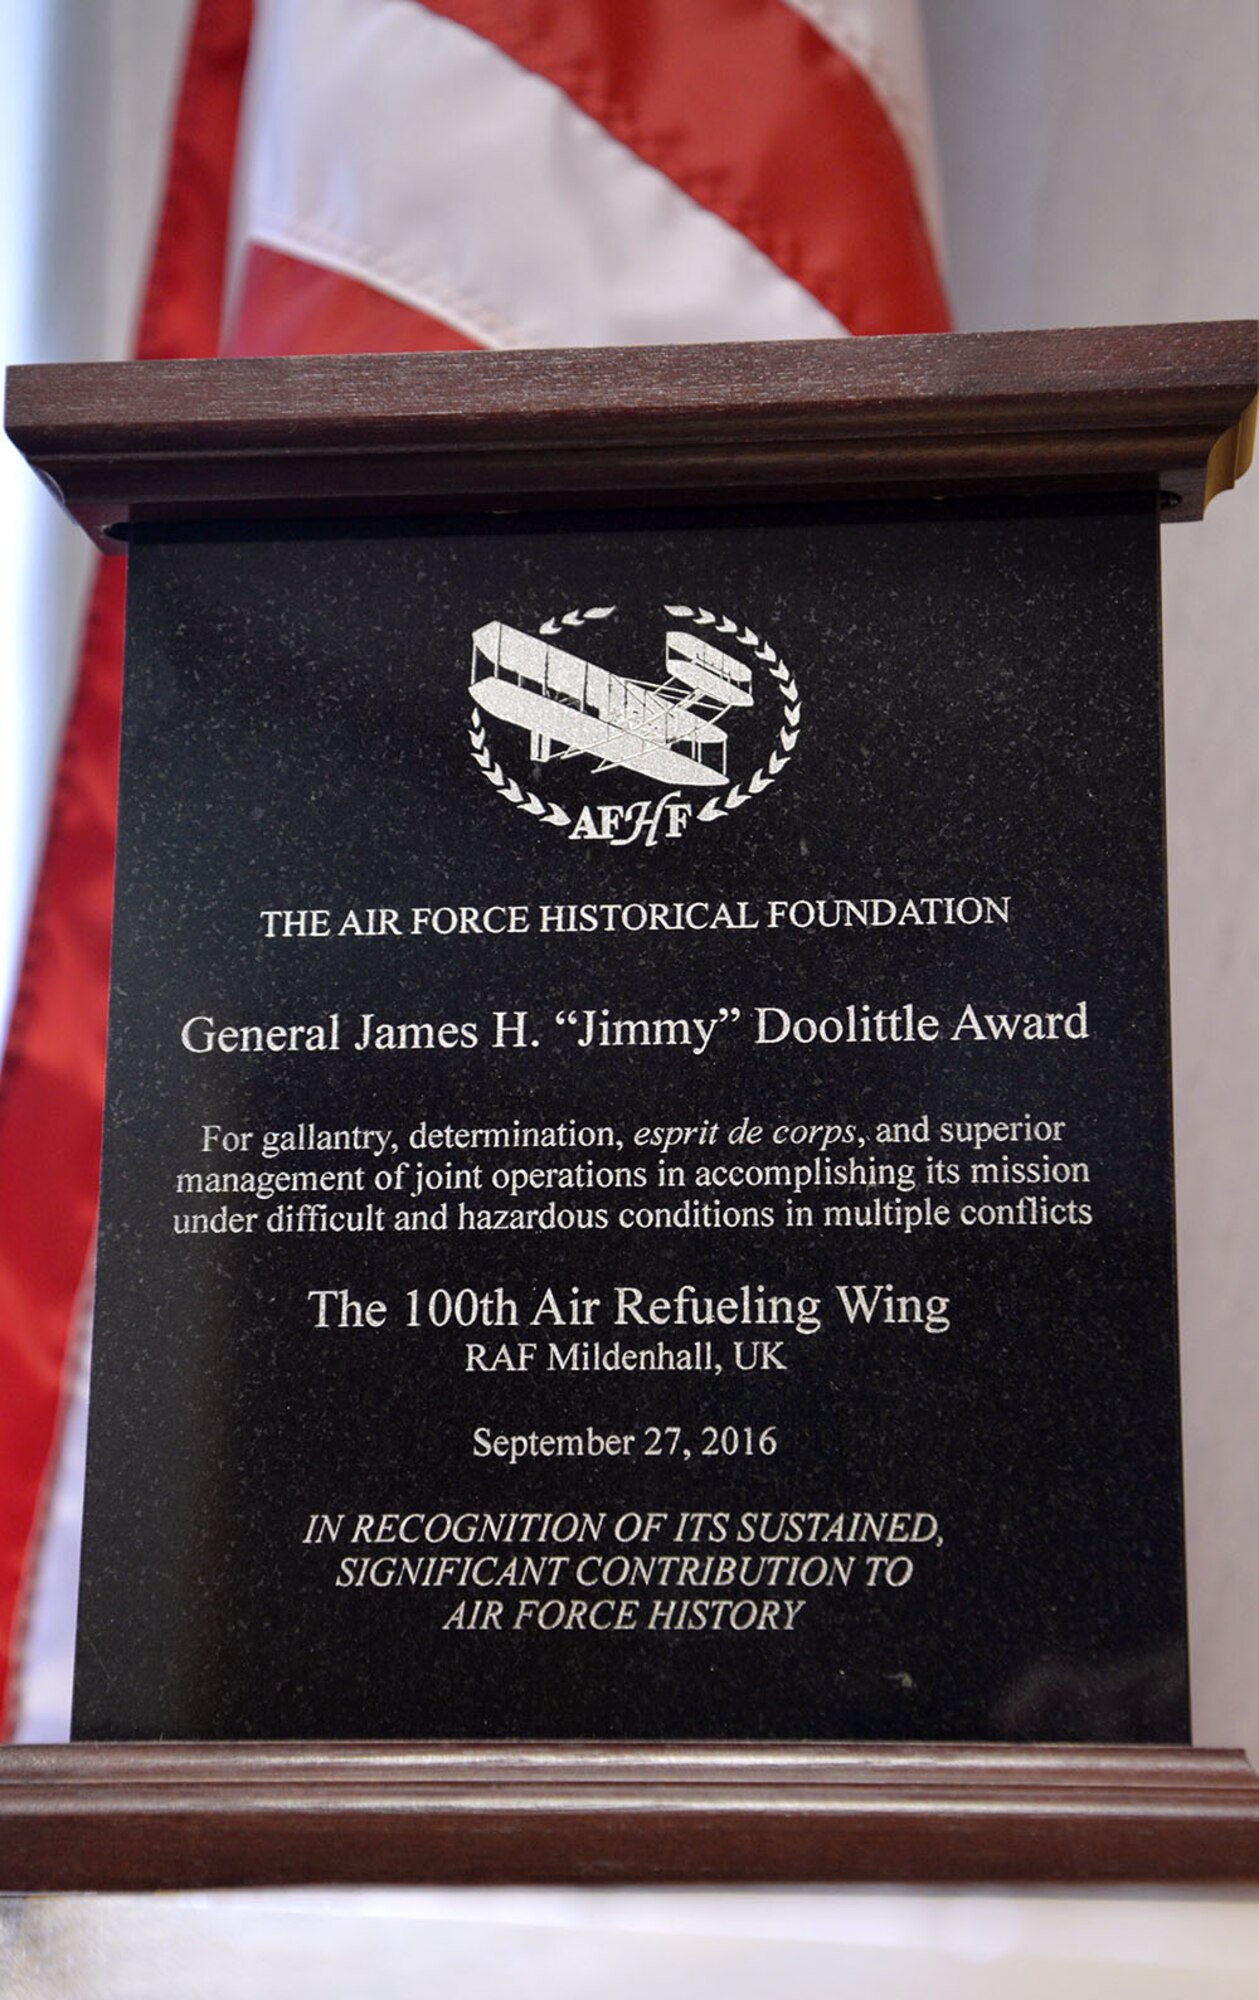 The Air Force Historical Foundation’s Doolittle Award, one of its highest, was presented to Col. Thomas Torkelson, 100th Air Refueling Wing commander, on behalf of the 100th ARW’s sustained and significant contributions to Air Force history Sept. 27, 2016, in Arlington, Va. According to the Air Force Historical Foundation’s website, the Doolittle Award is one of its most prestigious and recognizes a U.S. Air Force unit that has displayed bravery, determination, discipline, esprit de corps and superior management of joint operations in multiple conflicts. This is the first time it has been presented to a mobility air forces wing. The award is named after the pioneering pilot Gen. James Harold “Jimmy” Doolittle, whose career stretched from World War I to the height of the Cold War. (U.S. Air Force photo by Karen Abeyasekere)

